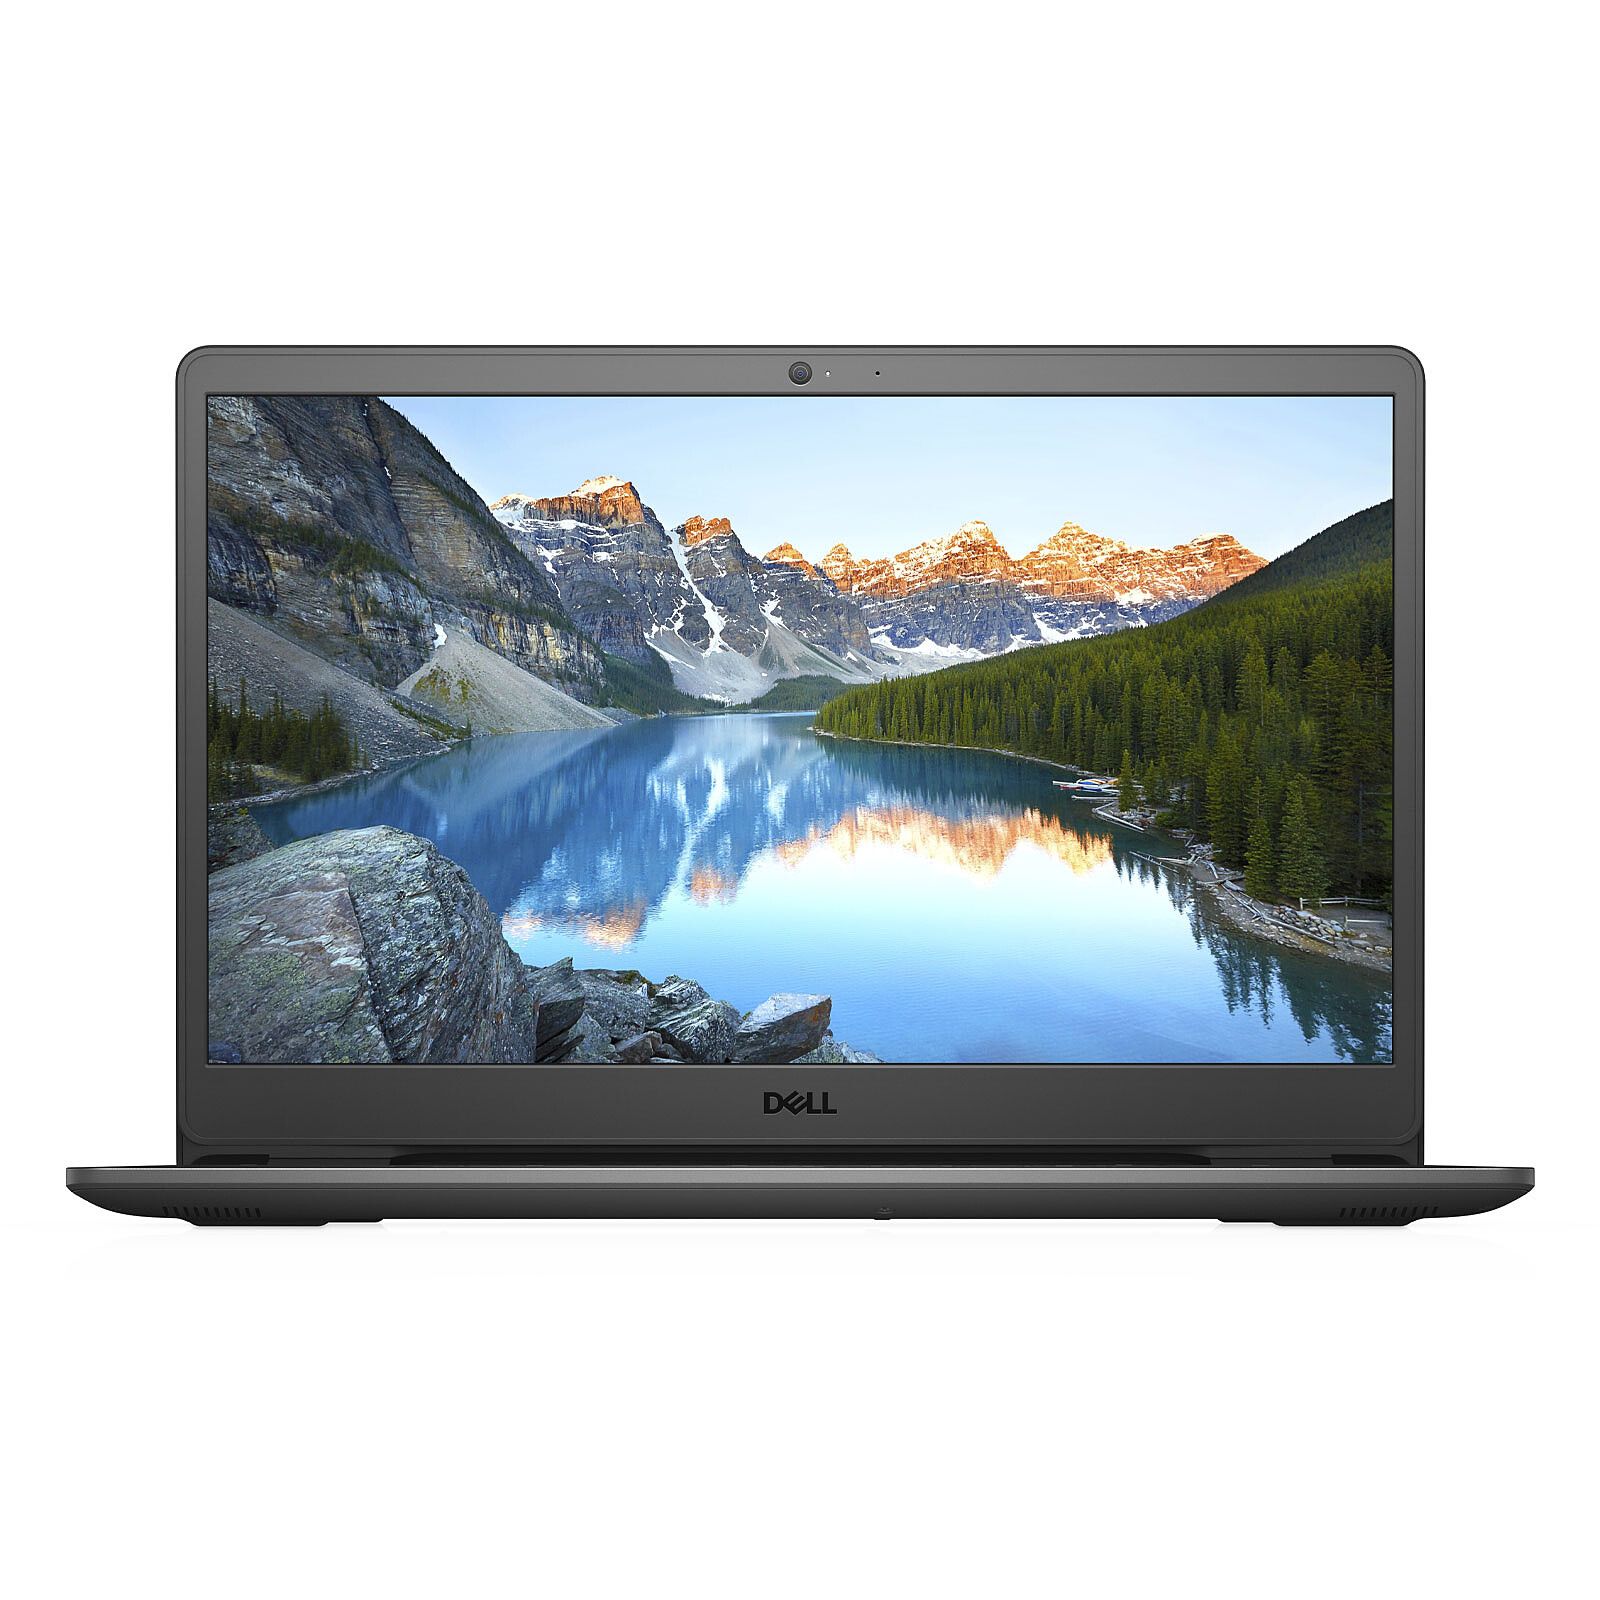 Dell Inspiron 15 3502 4748 Laptop, How To Screen Mirror Dell Laptop Tv